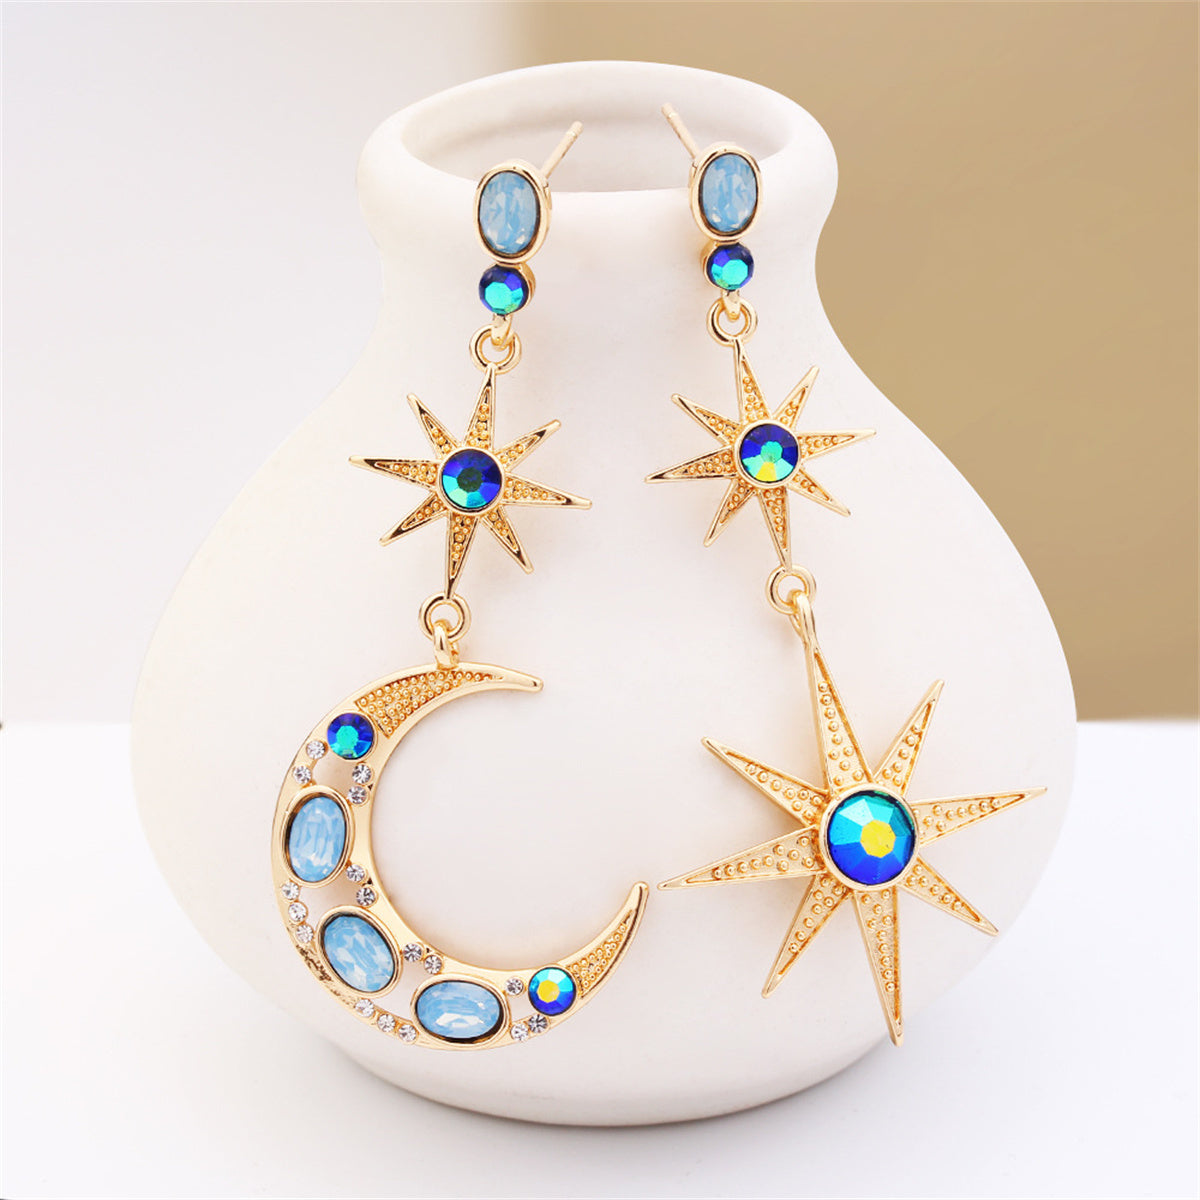 Celestial Moon & Star Drop Earrings Gold Moon Star with crystal and blue tonal colored stone Earrings for Women